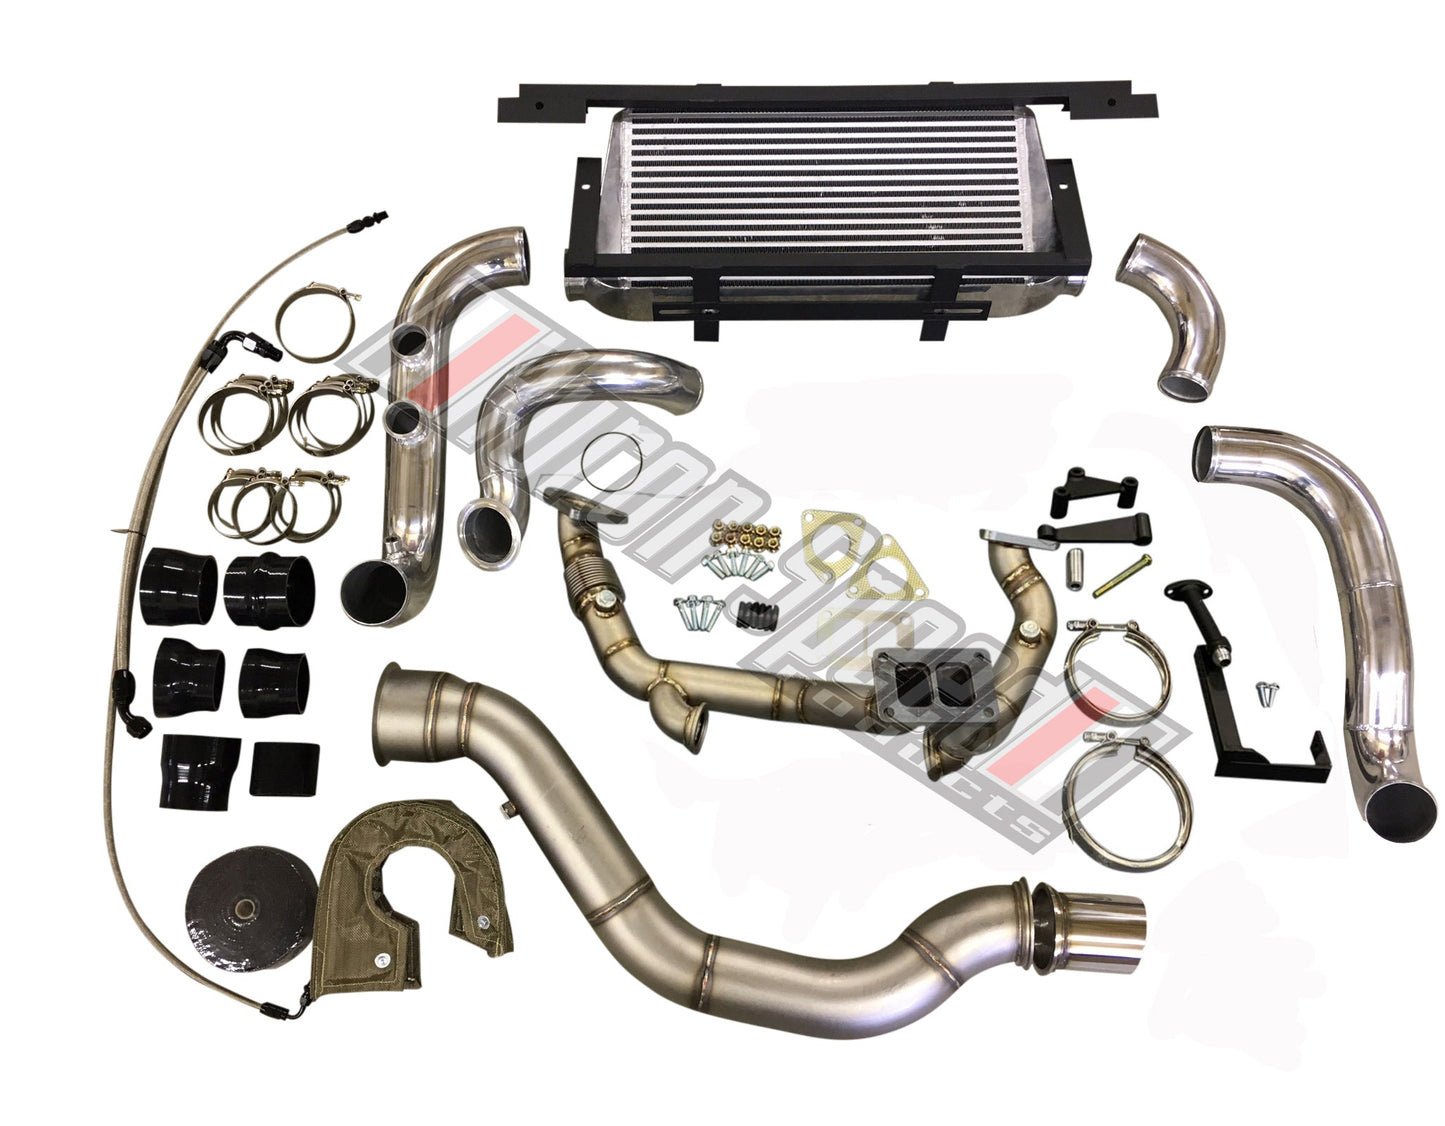 V1 T6 Turbo Kit Group Purchase FINAL PAYMENT